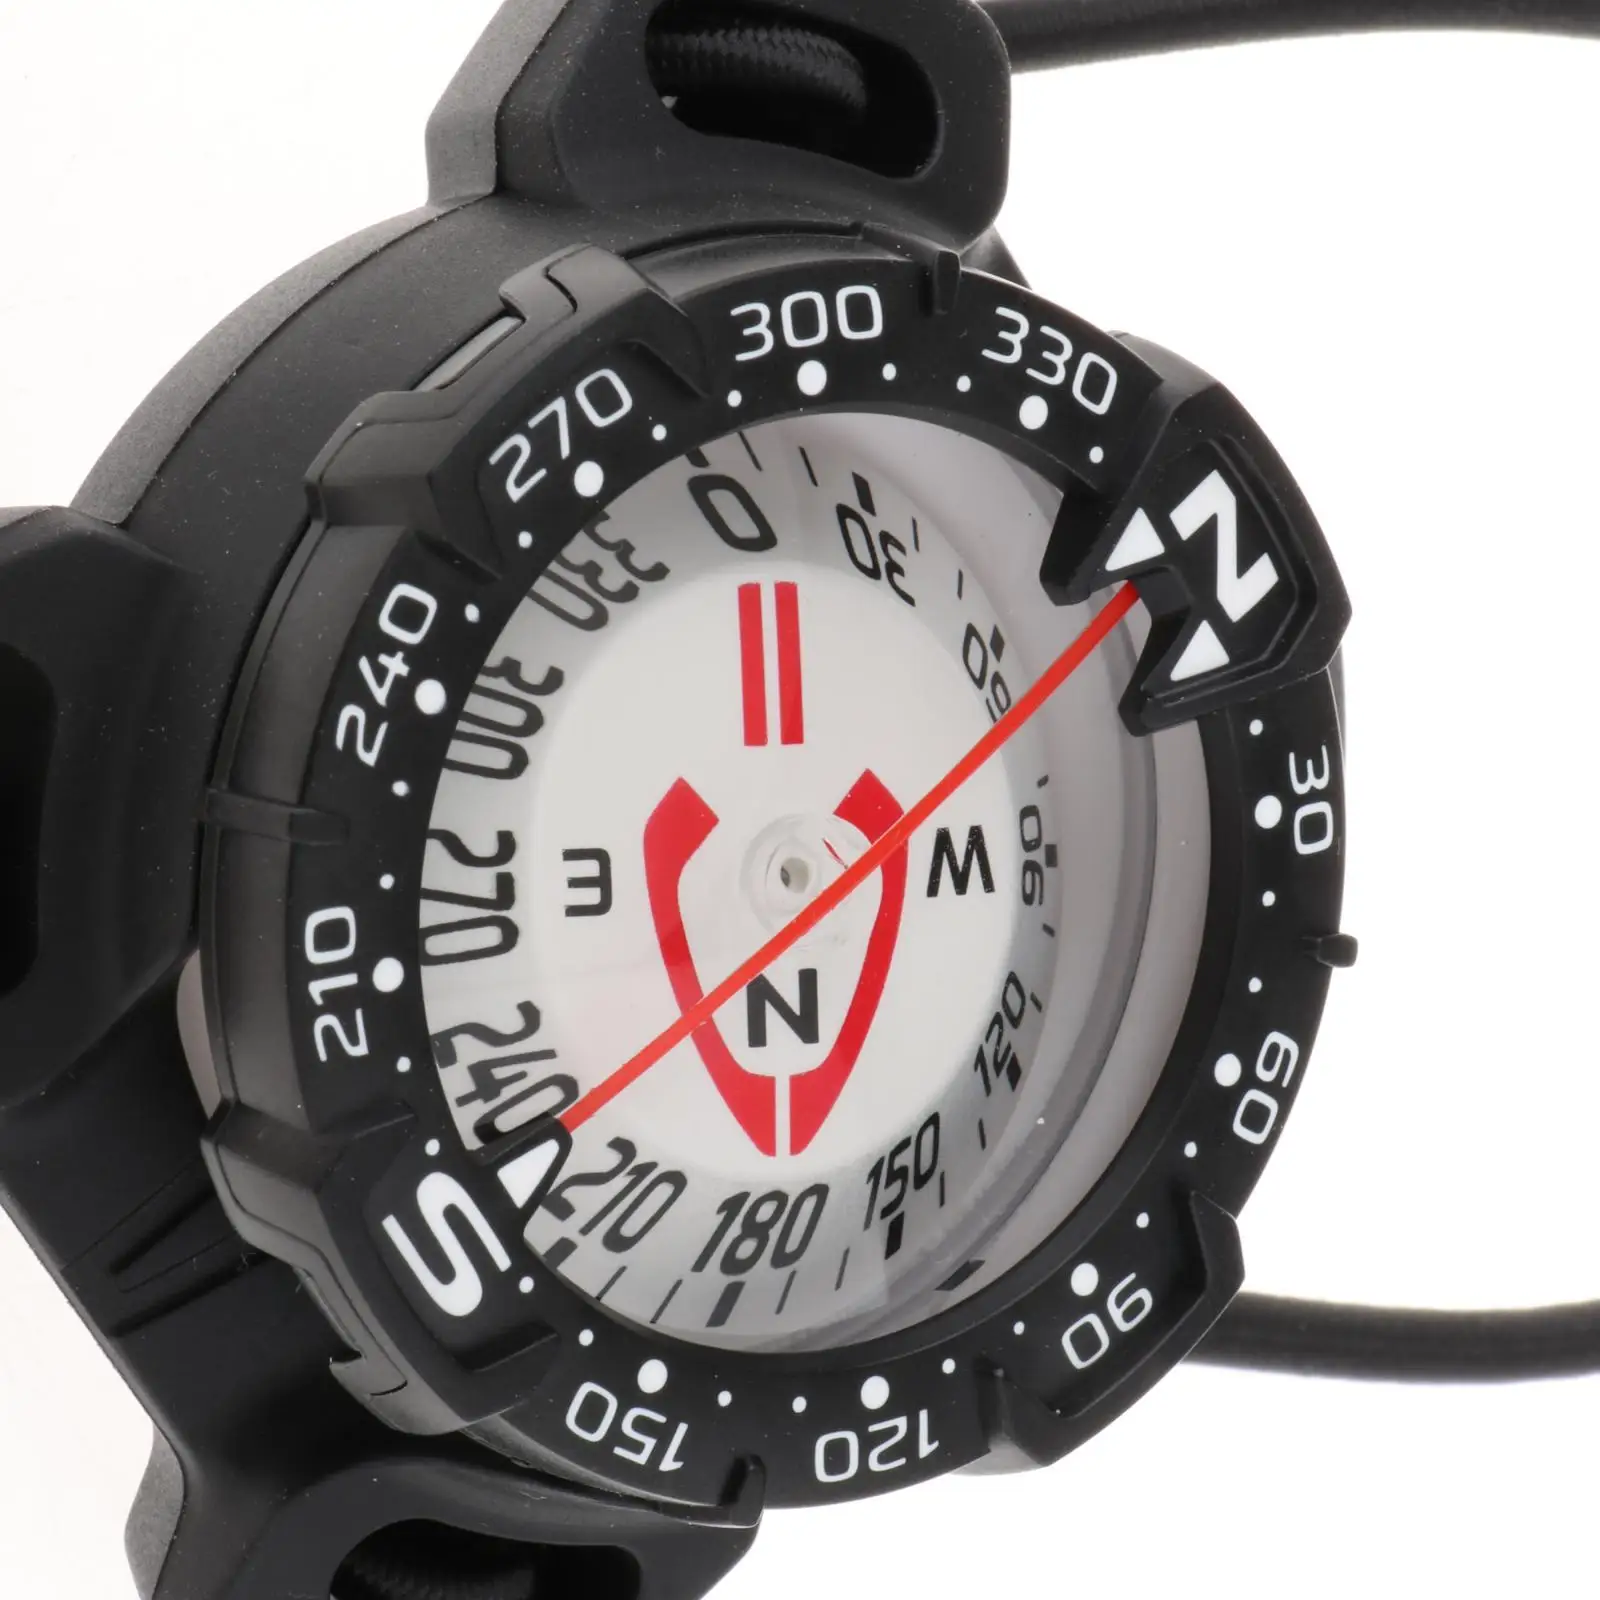 Diving Compass Gauge Snorkeling Compass for Hiking Emergency